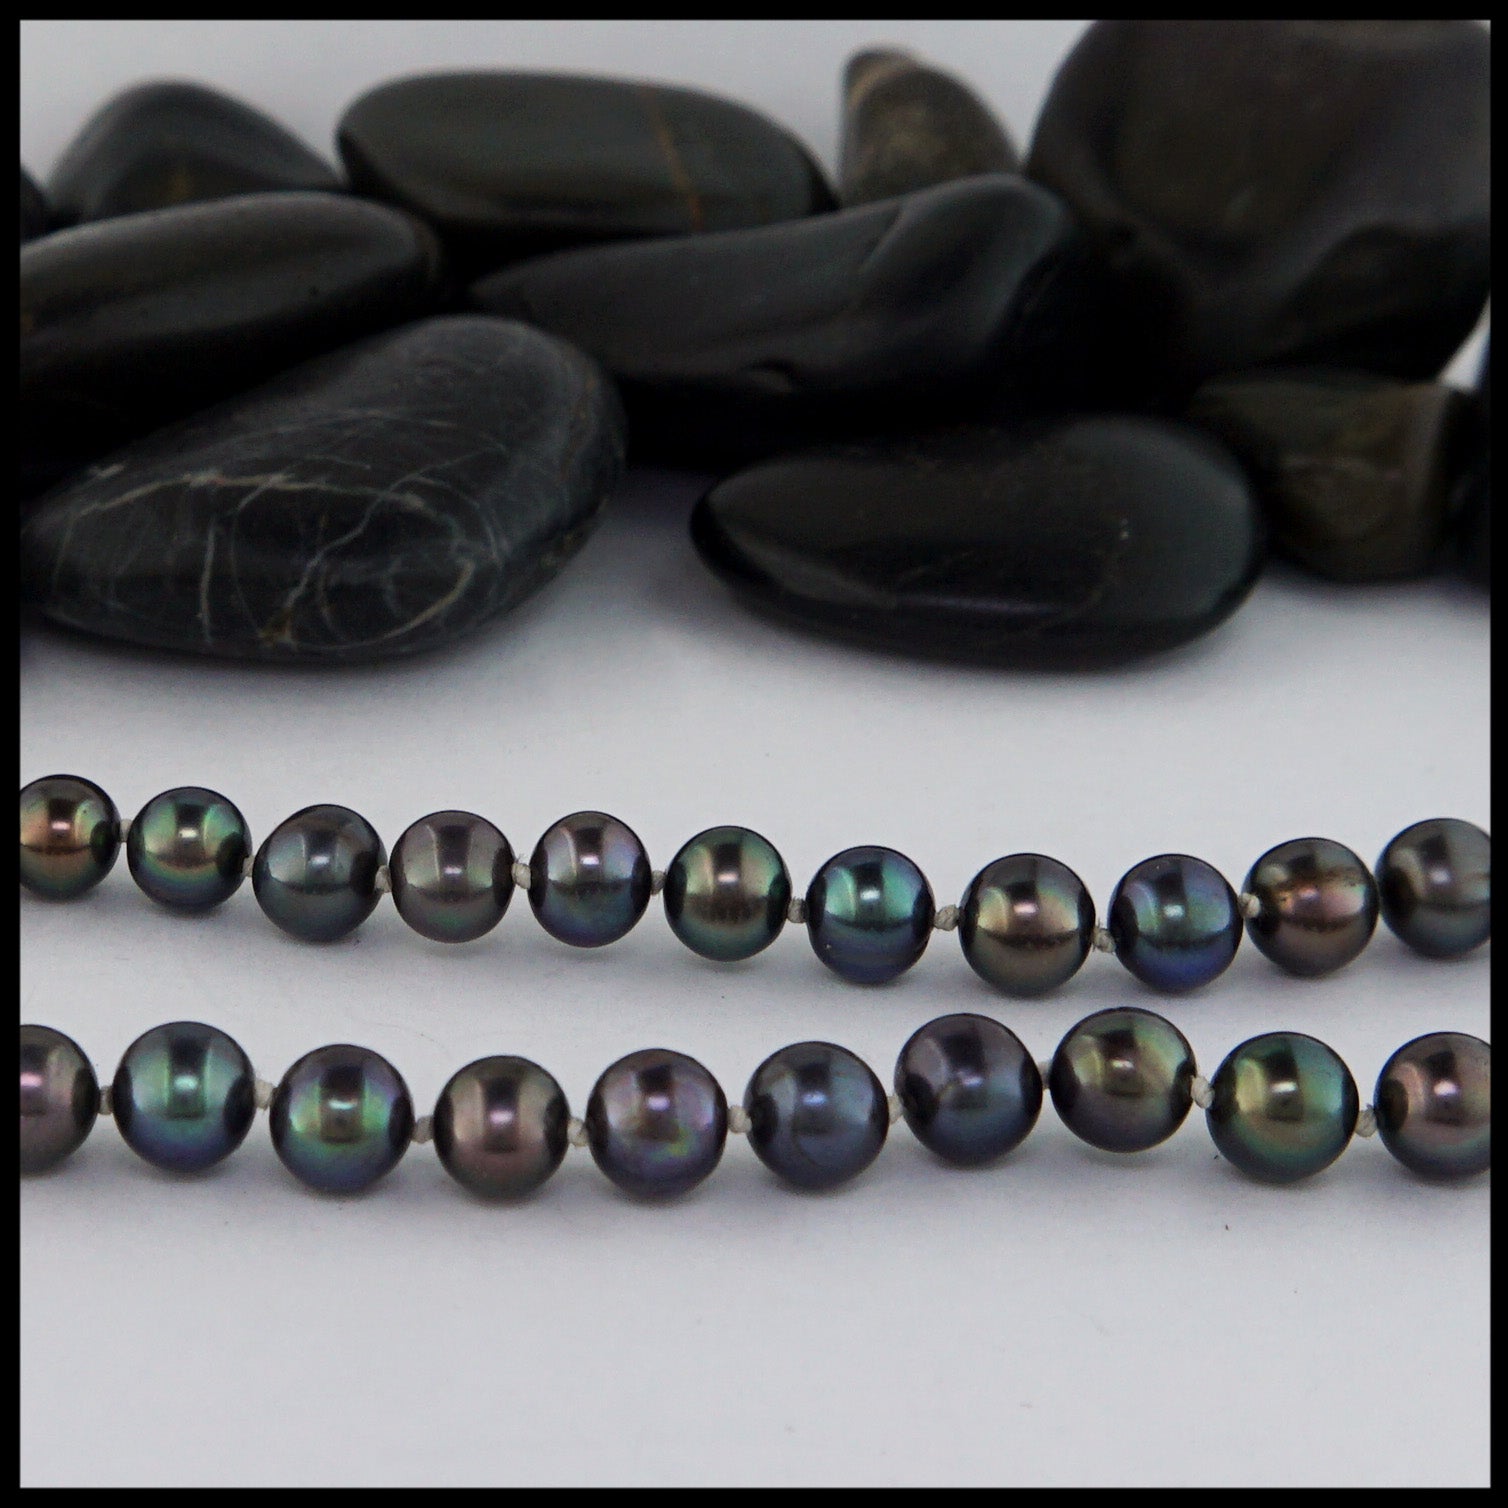 TN032 (AA 10-12mm Tahitian Black Pearl Necklace 14k White gold clasp) -  pacific pearls international